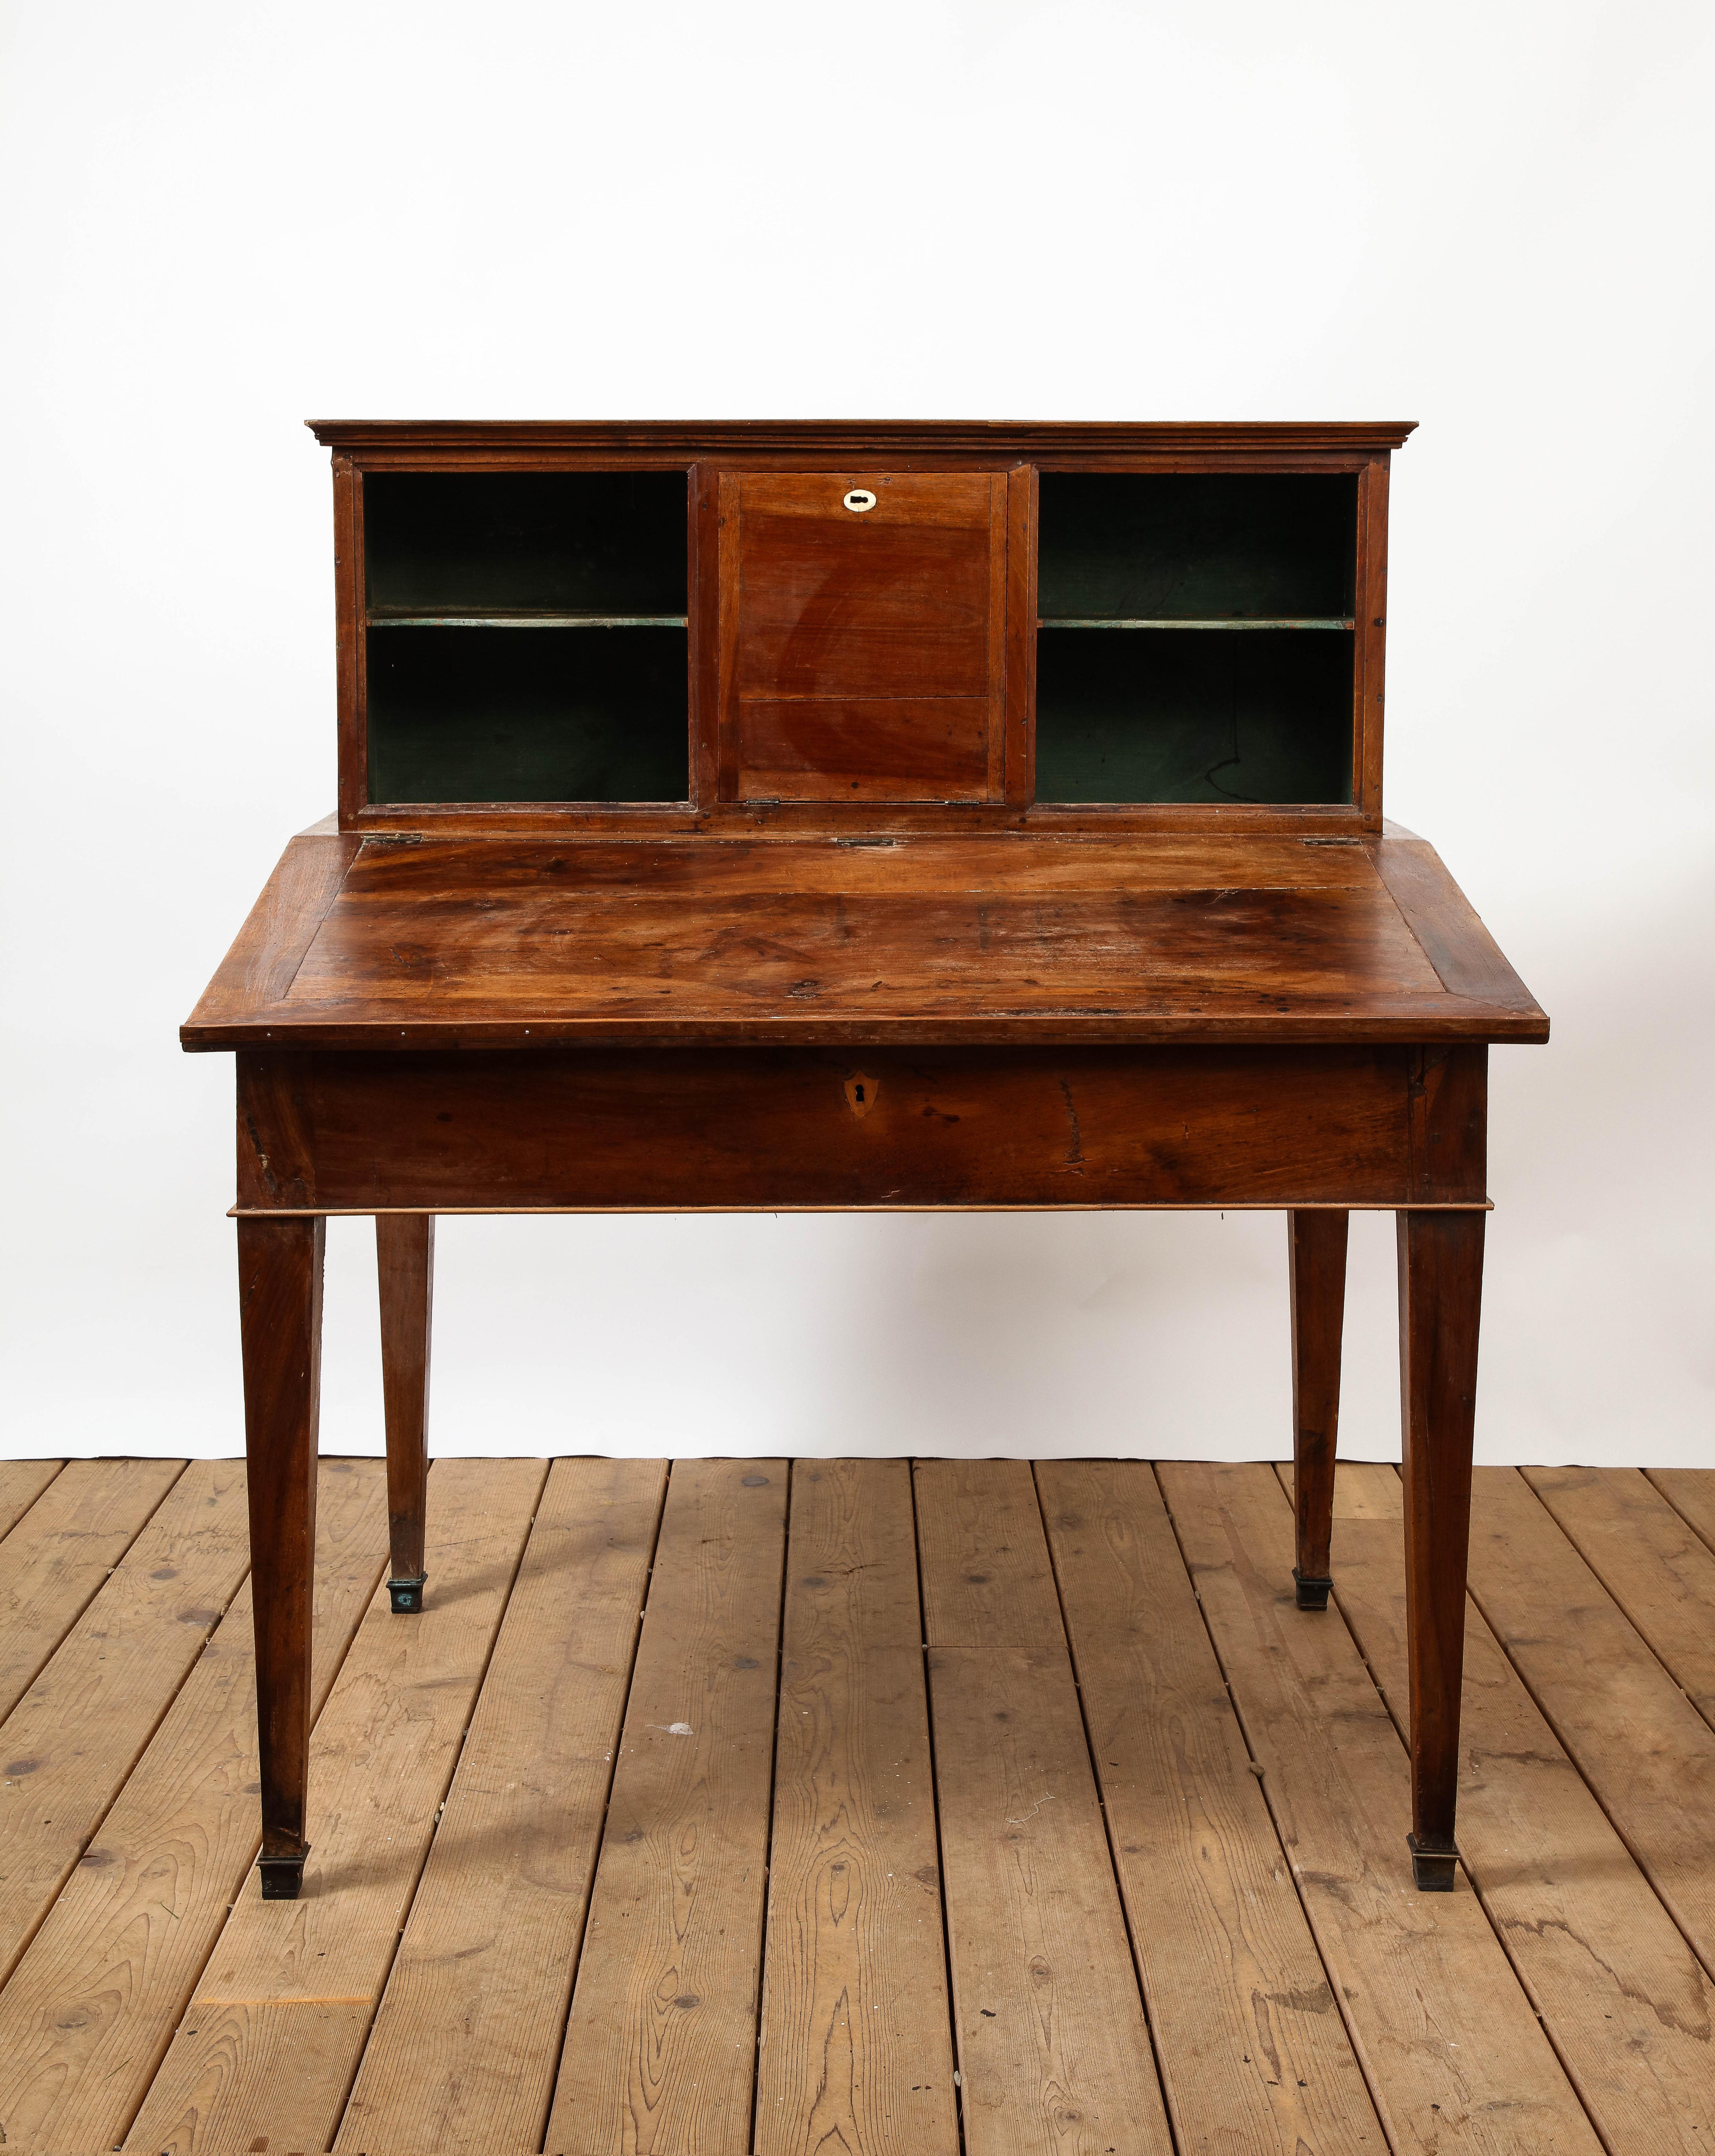 19th century Italian fruitwood antique desk with storage and shelves. Interior storage has original green paint; original hardware and locks. Square sabots. 

Additional Dimensions:
upper cabinet 16